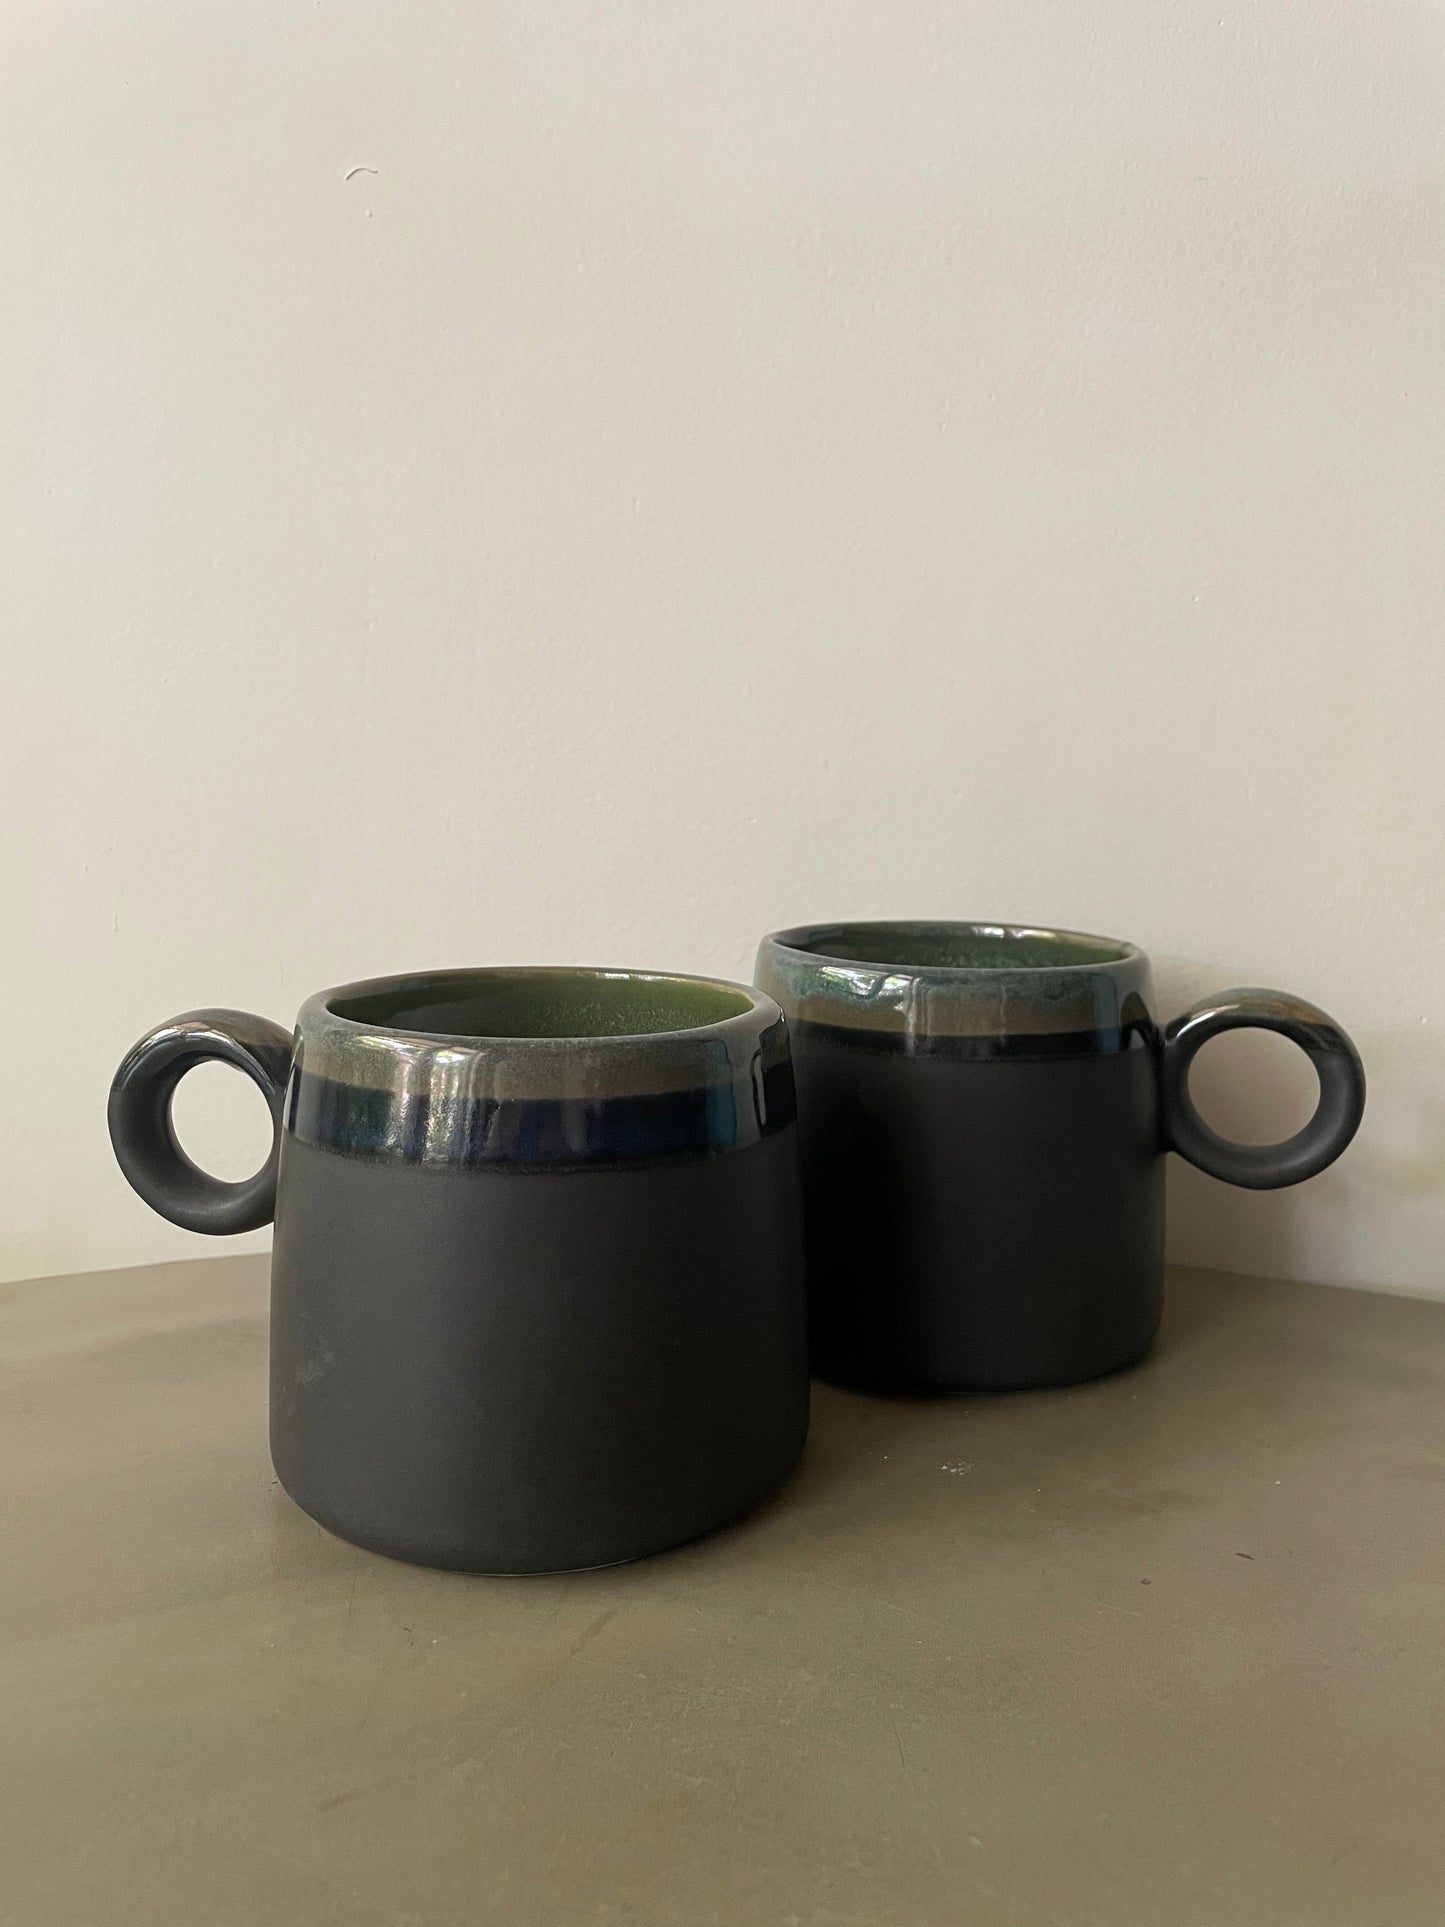 Pair of medium rounded ceramic mugs with round handles, dual glaze finish in green tones and black, on a cement coffee table. Shop artistic ceramics in Bangalore